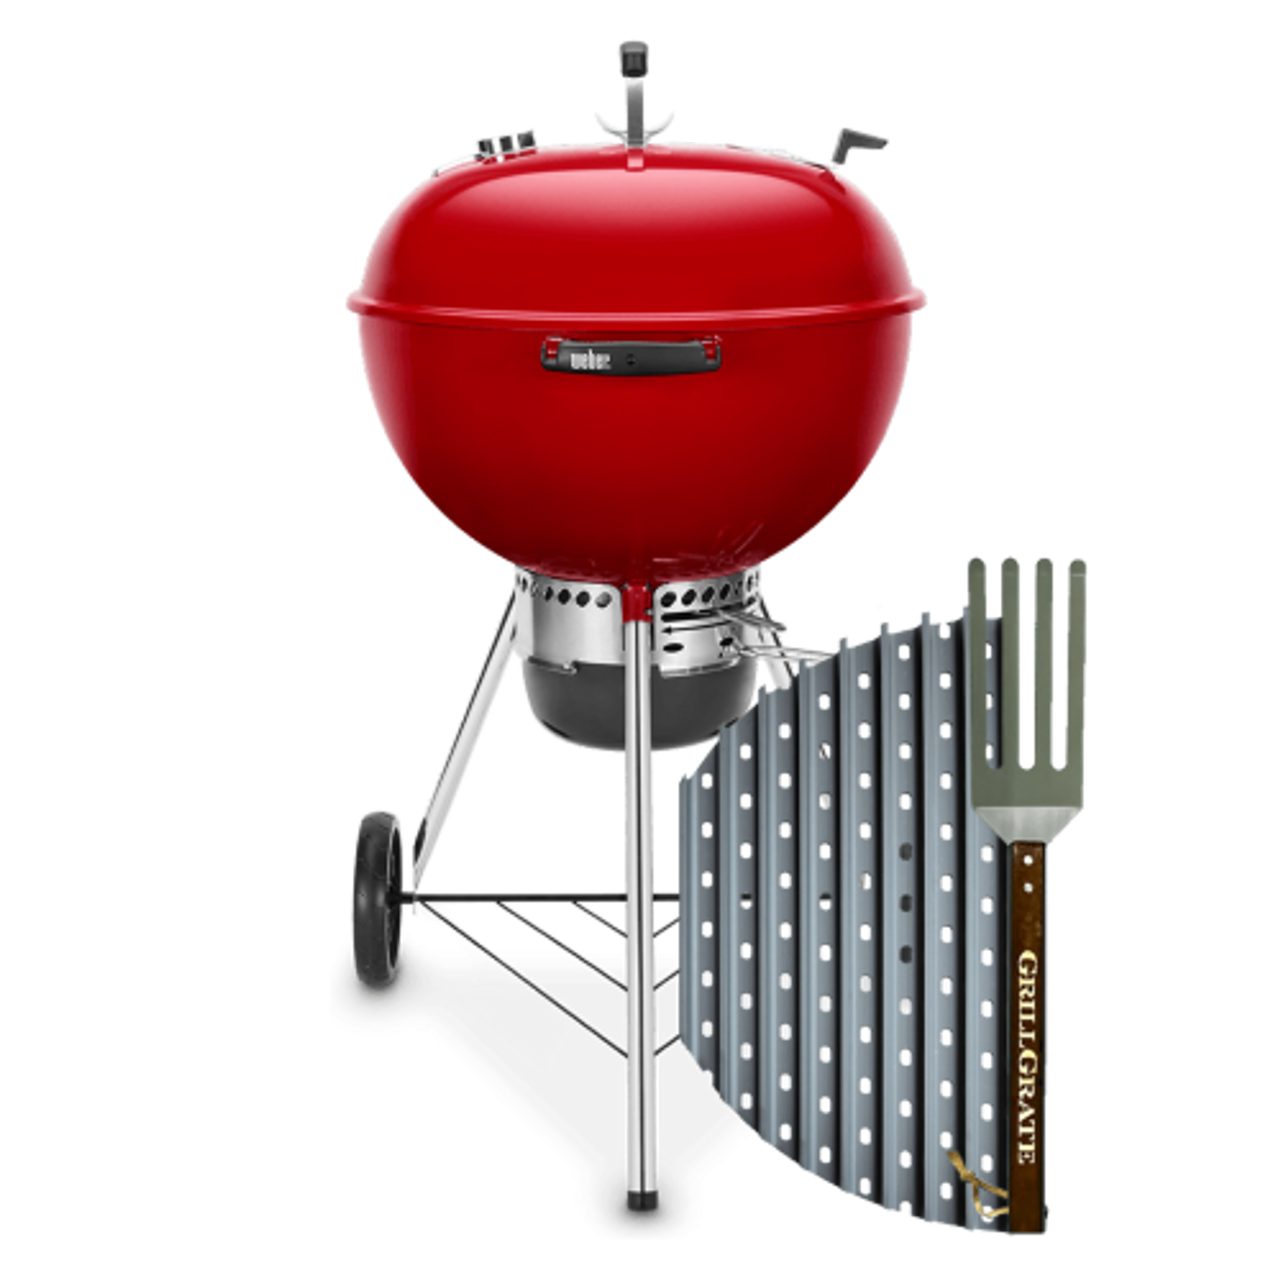 Barbecue Master: Grilling on the Weber Kettle with a Meadow